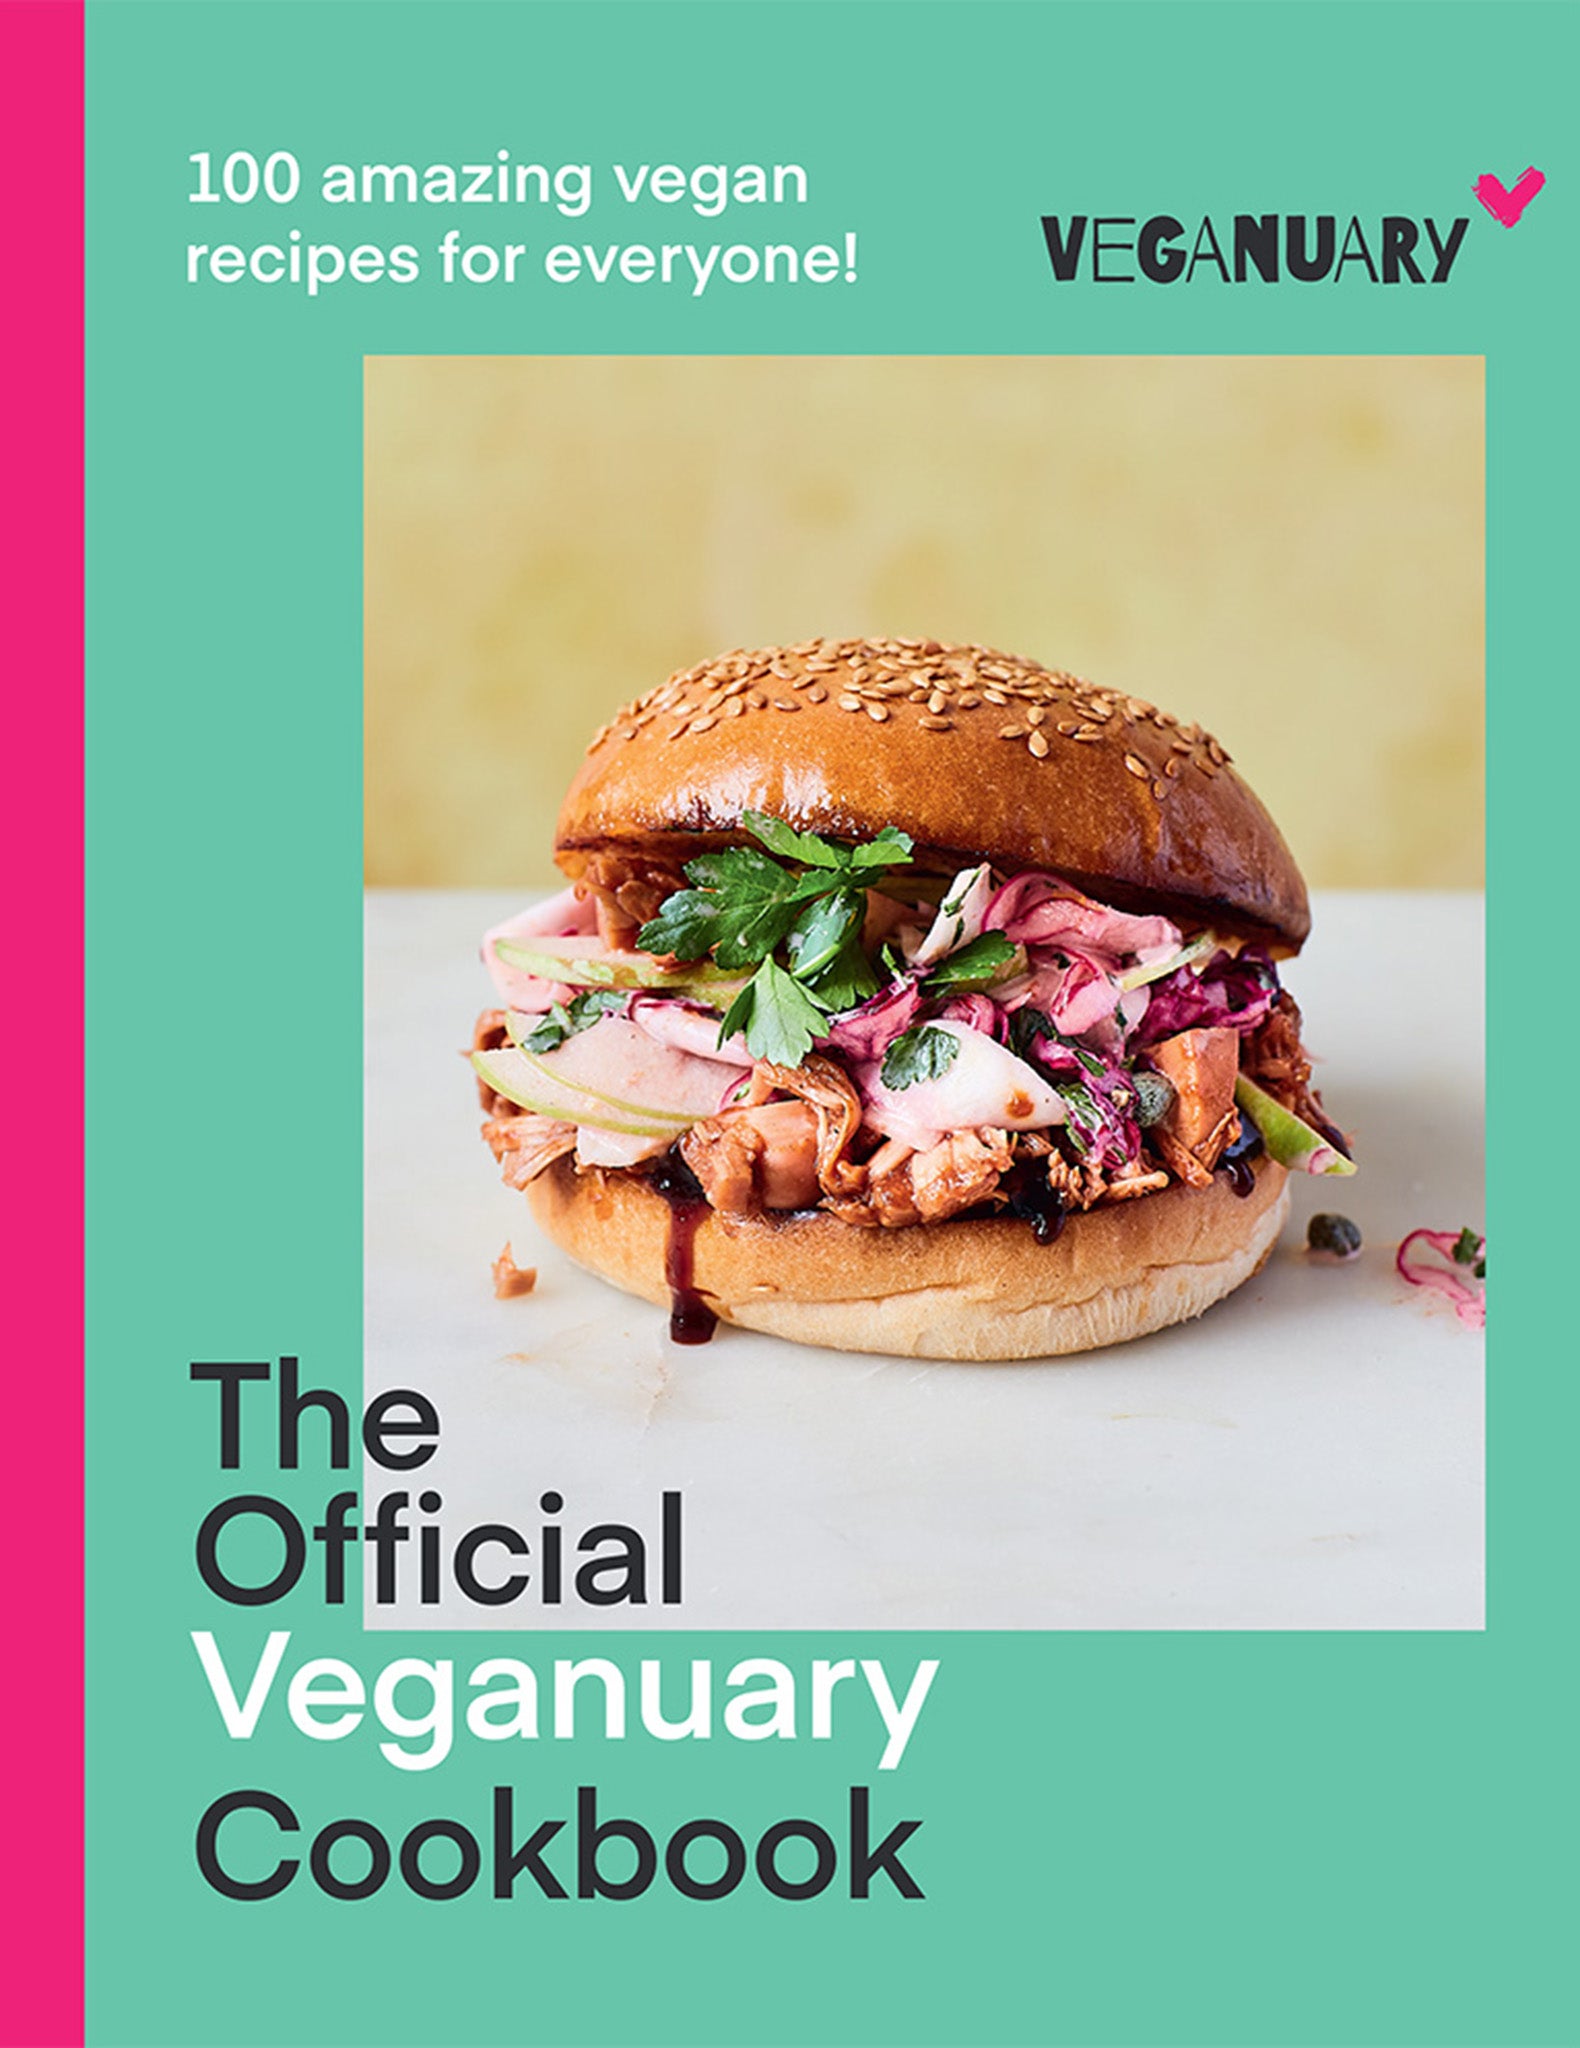 The Veganuary charity has just released its first cookbook